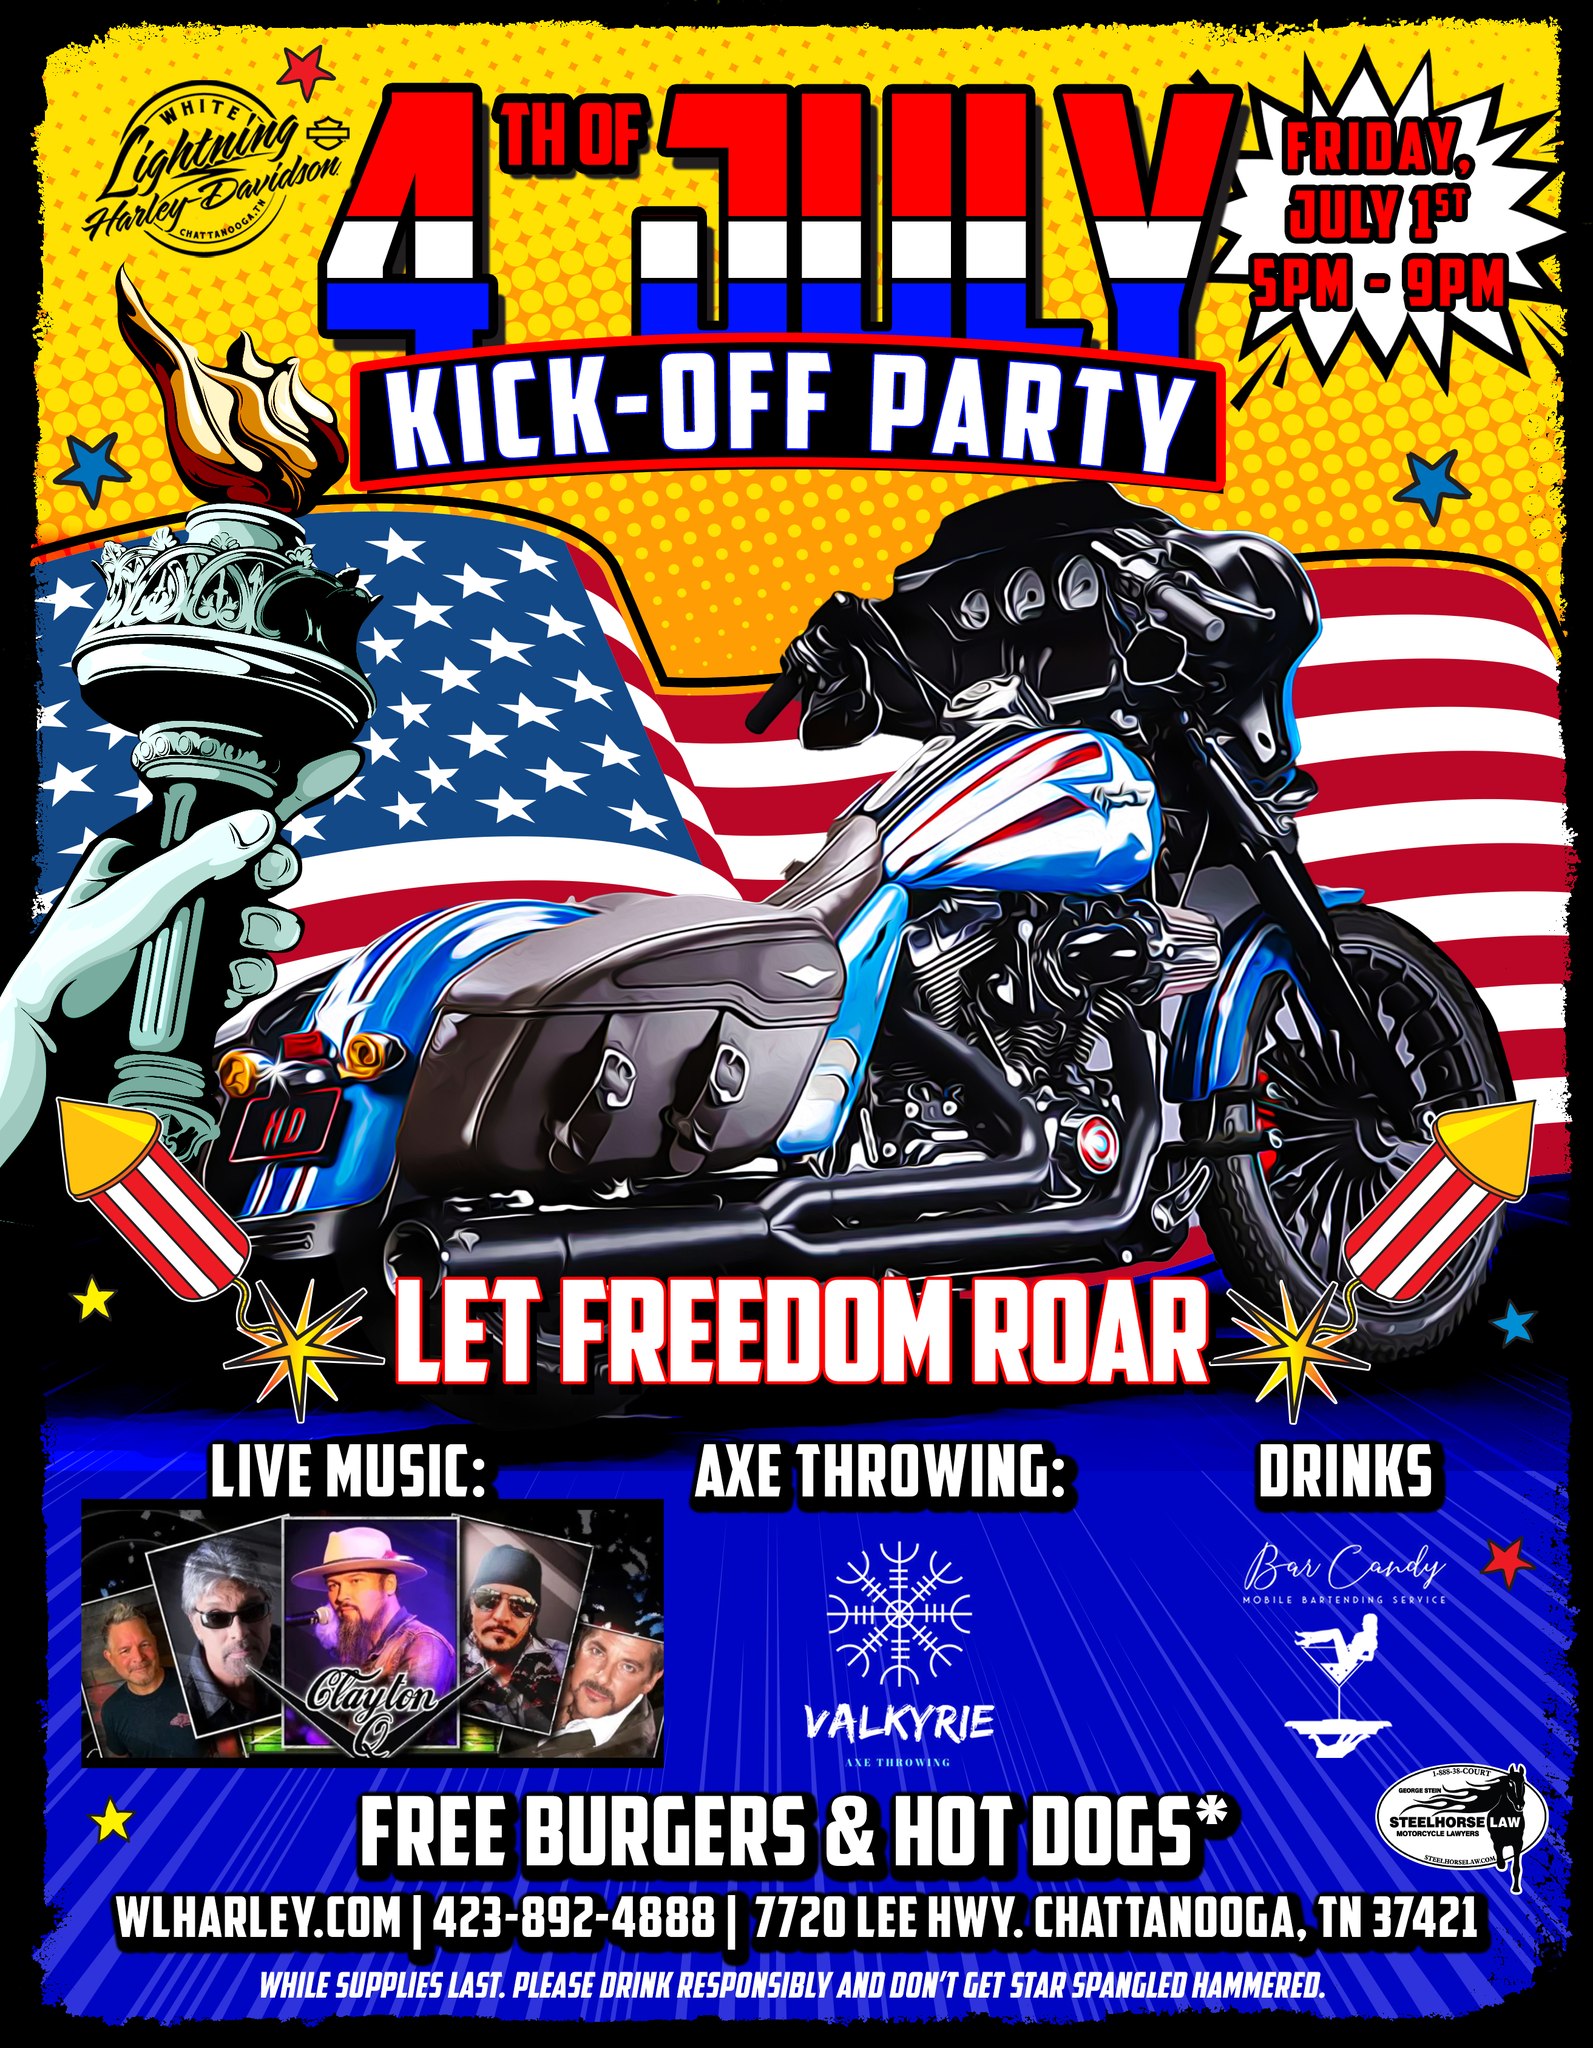 4th of July Weekend Kick-off Party!!